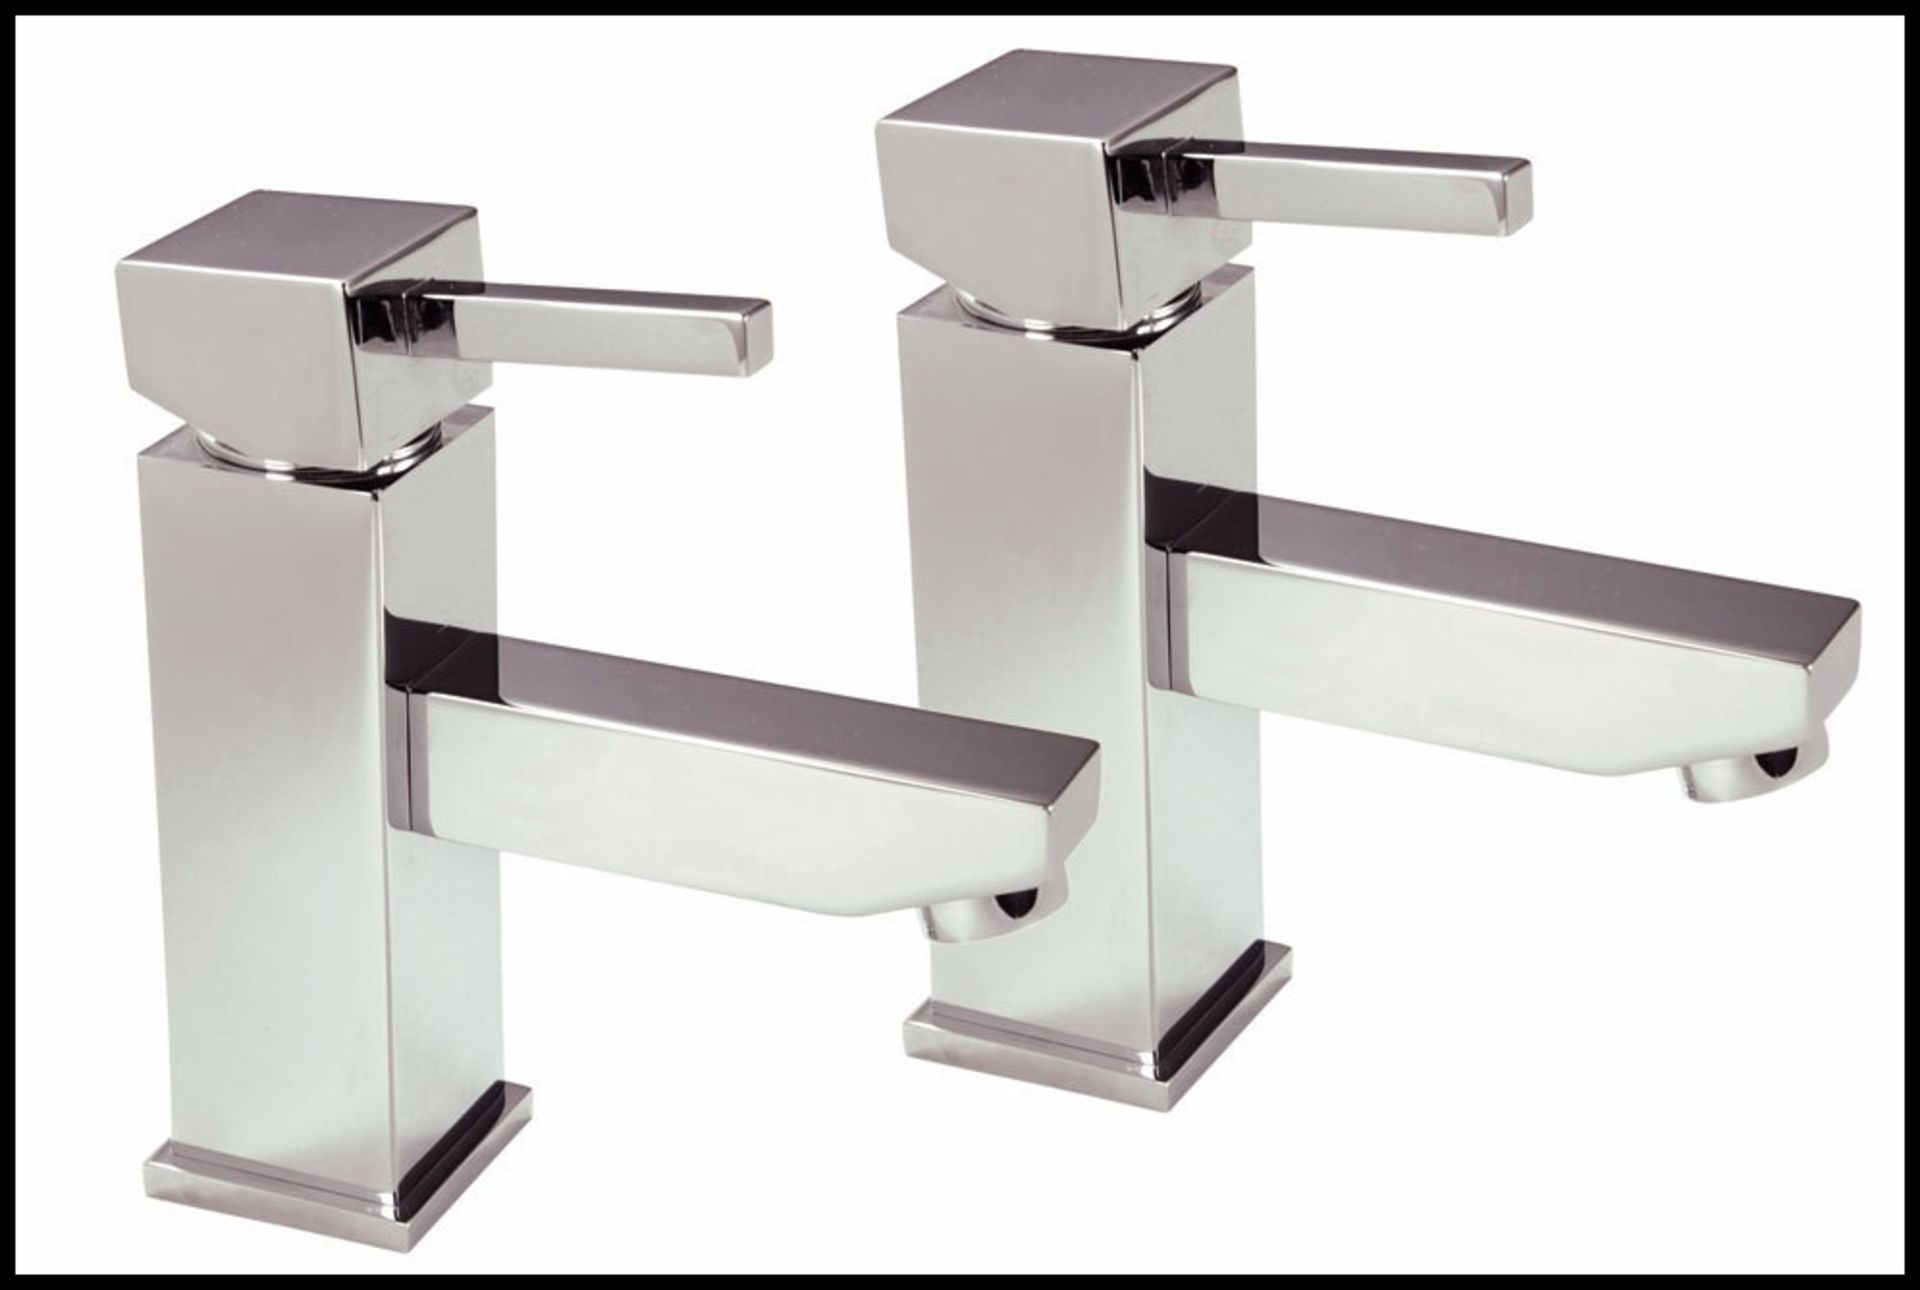 1 x Verona Set of Basin Taps - Vogue Bathrooms - Contemporary Basin Taps With Bright Chrome Finish - - Image 2 of 10